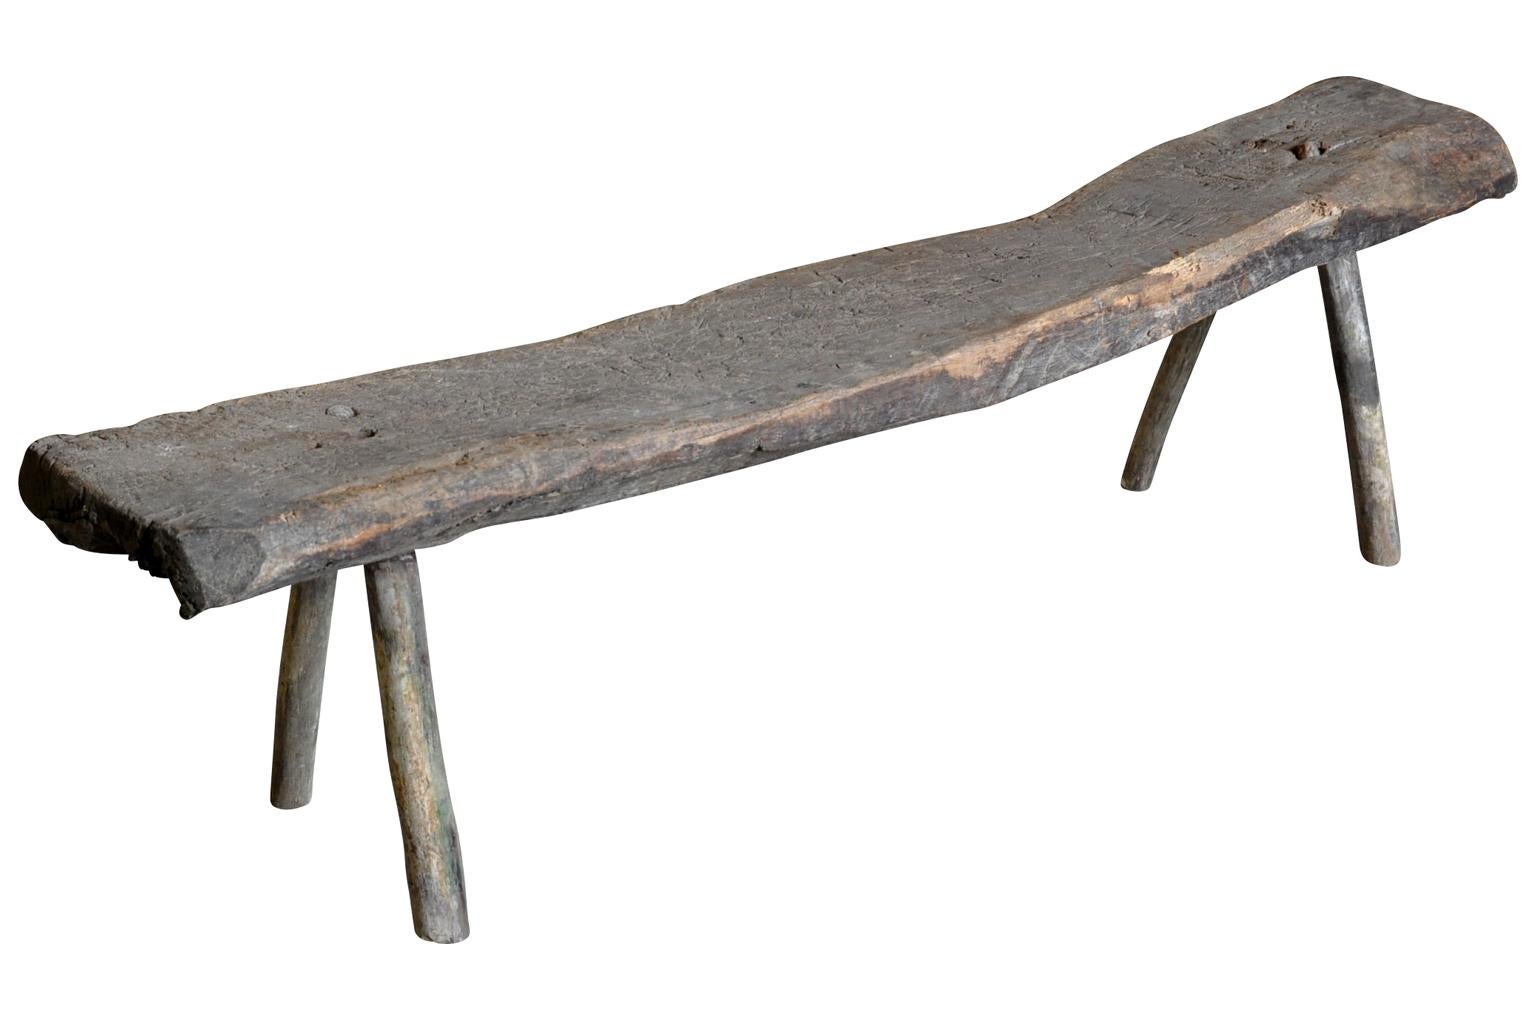 A terrific Primitive bench from the Catalan region of Spain. Soundly constructed with a massive solid board top. Not only wonderful as a bench, but as a long narrow coffee table as well for any interior or exterior.